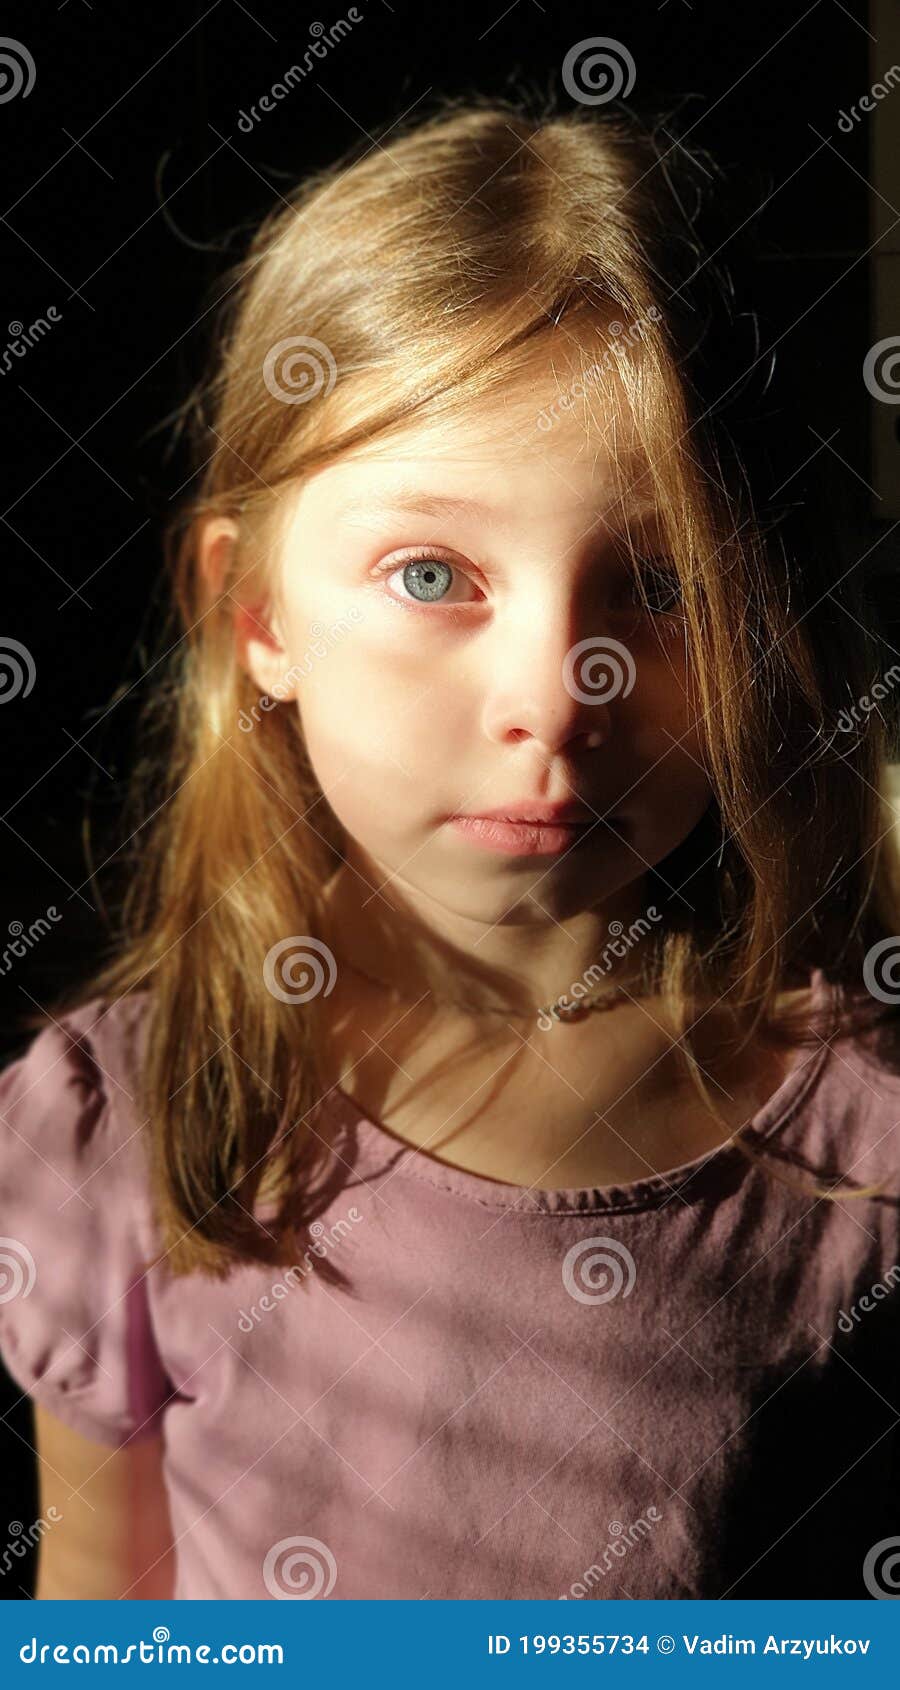 Portrait of a Little Girl with Golden Hair and Blue Eyes, the Child Looks  at the Camera with Big Eyes Stock Photo - Image of beauty, model: 199355734